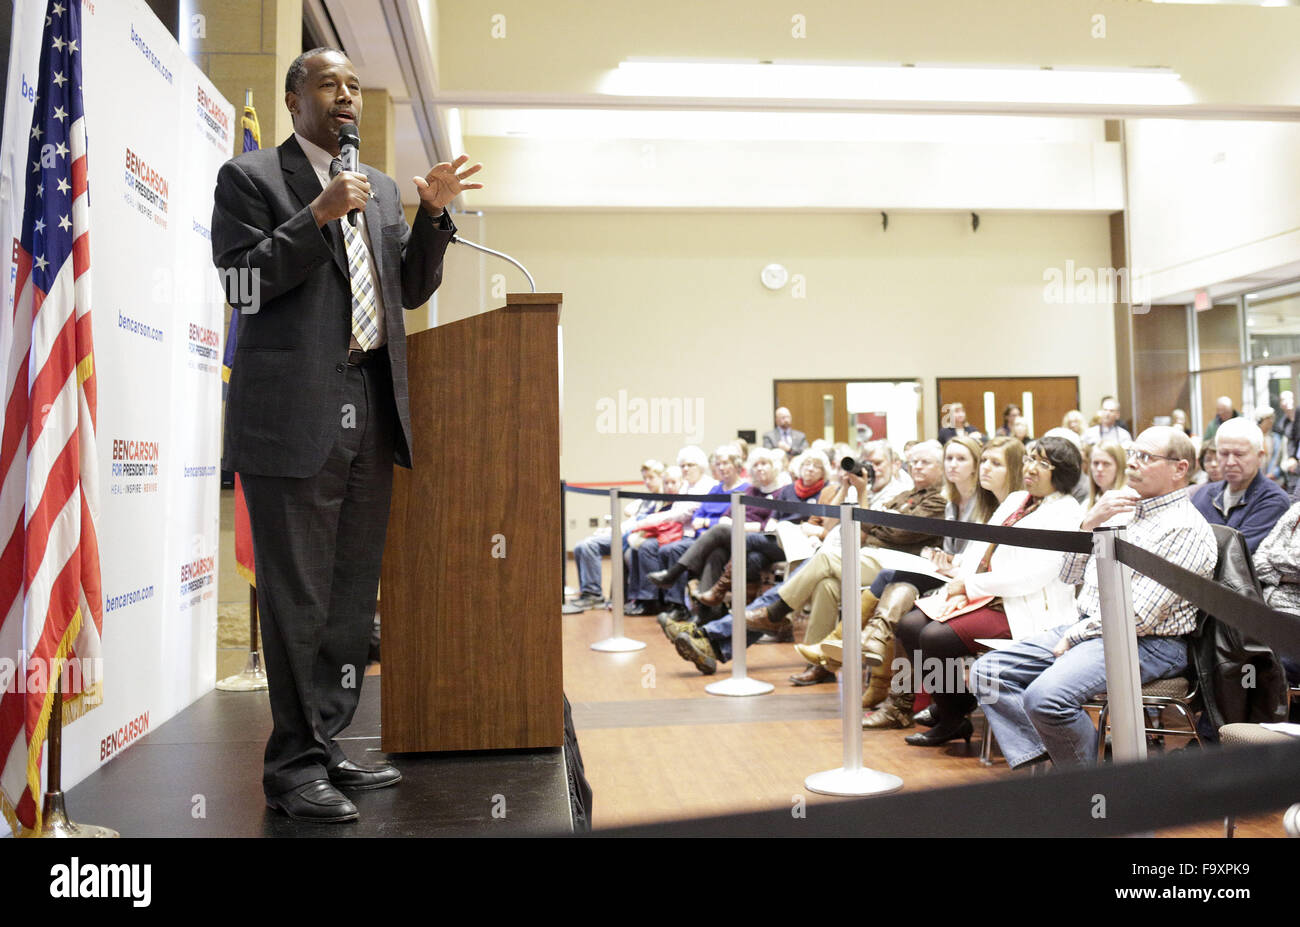 Orange City, Iowa, USA. 18th Dec, 2015. Republican Presidential candidate Dr. BEN CARSON speaks at the private Christian school, Northwestern College, about his Christian faith and the direction the U.S. is currently going while campaigning in Orange City. Credit:  Jerry Mennenga/ZUMA Wire/Alamy Live News Stock Photo